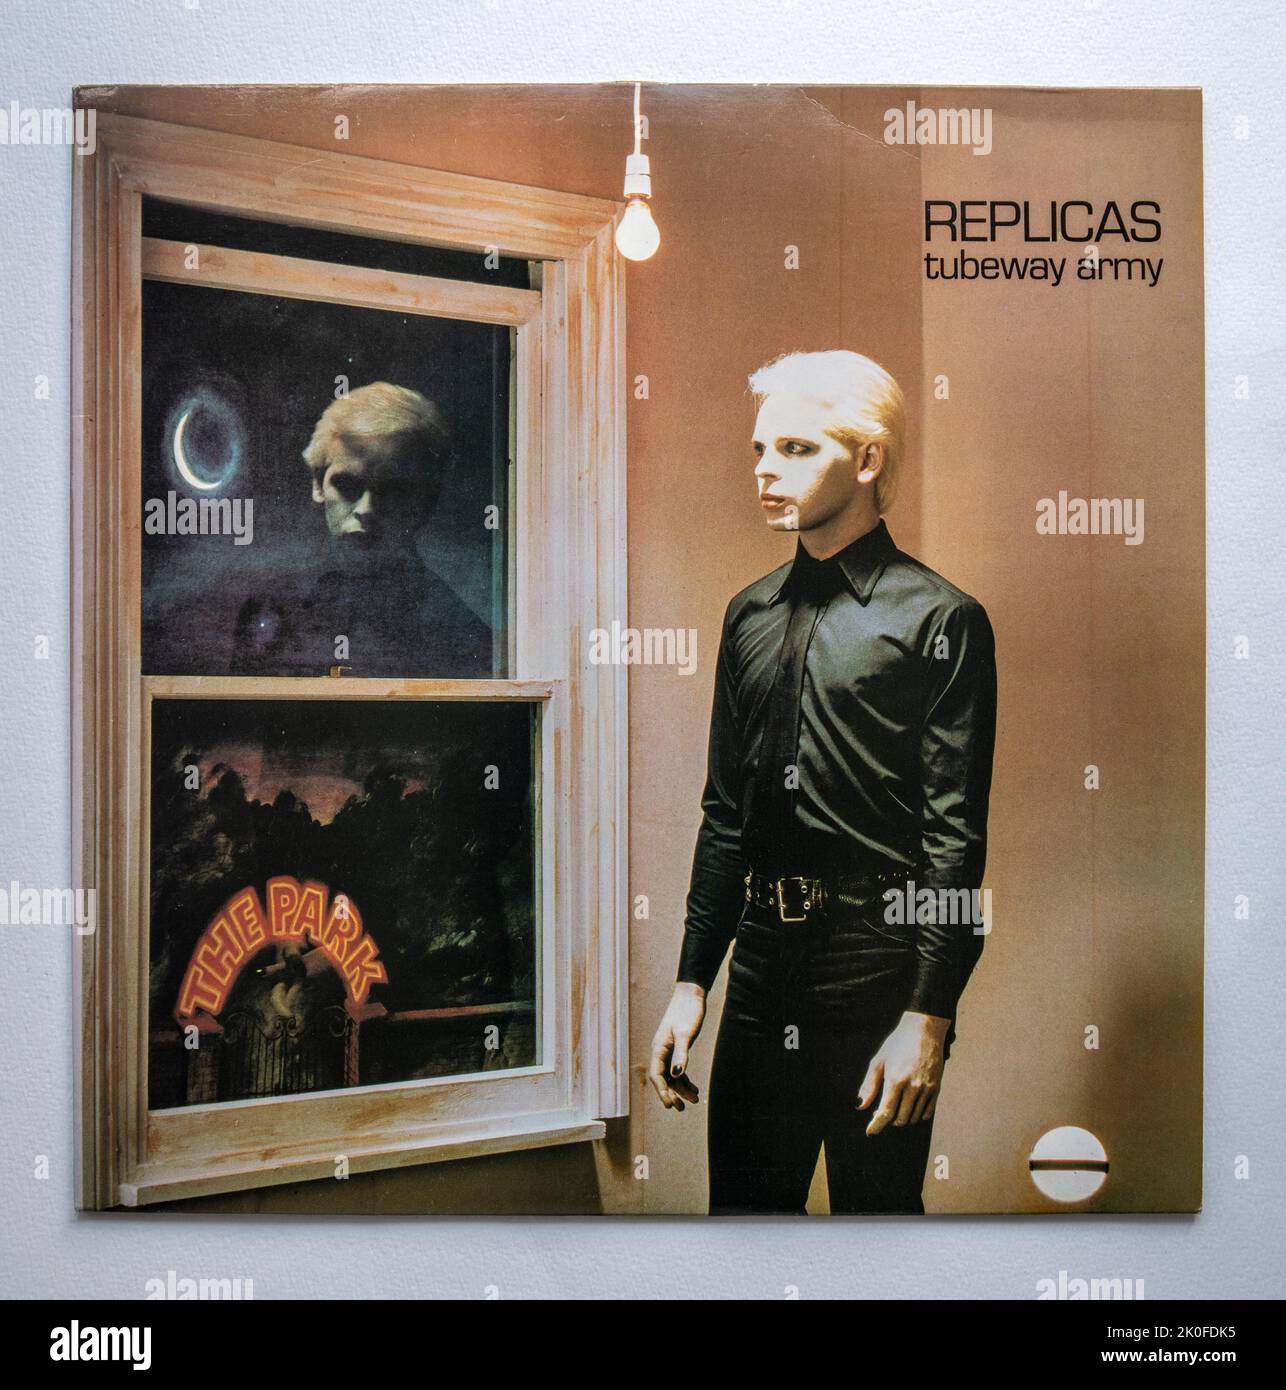 LP cover of Replicas, the second studio album by Tubeway Army, which was released in 1979 Stock Photo